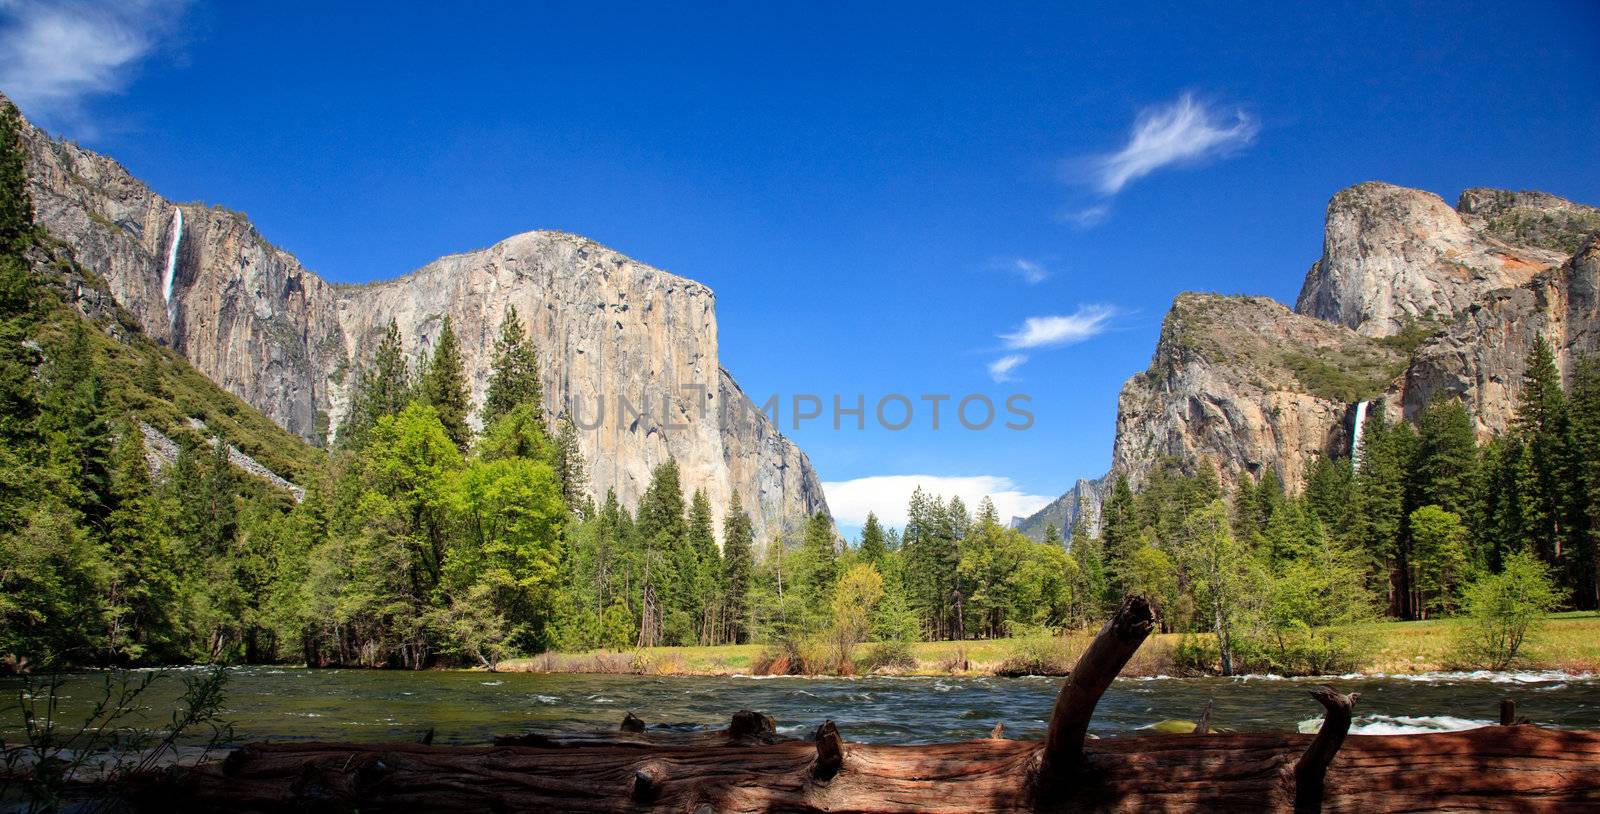 View into Yosemite Valley with cedar colored log in foreground